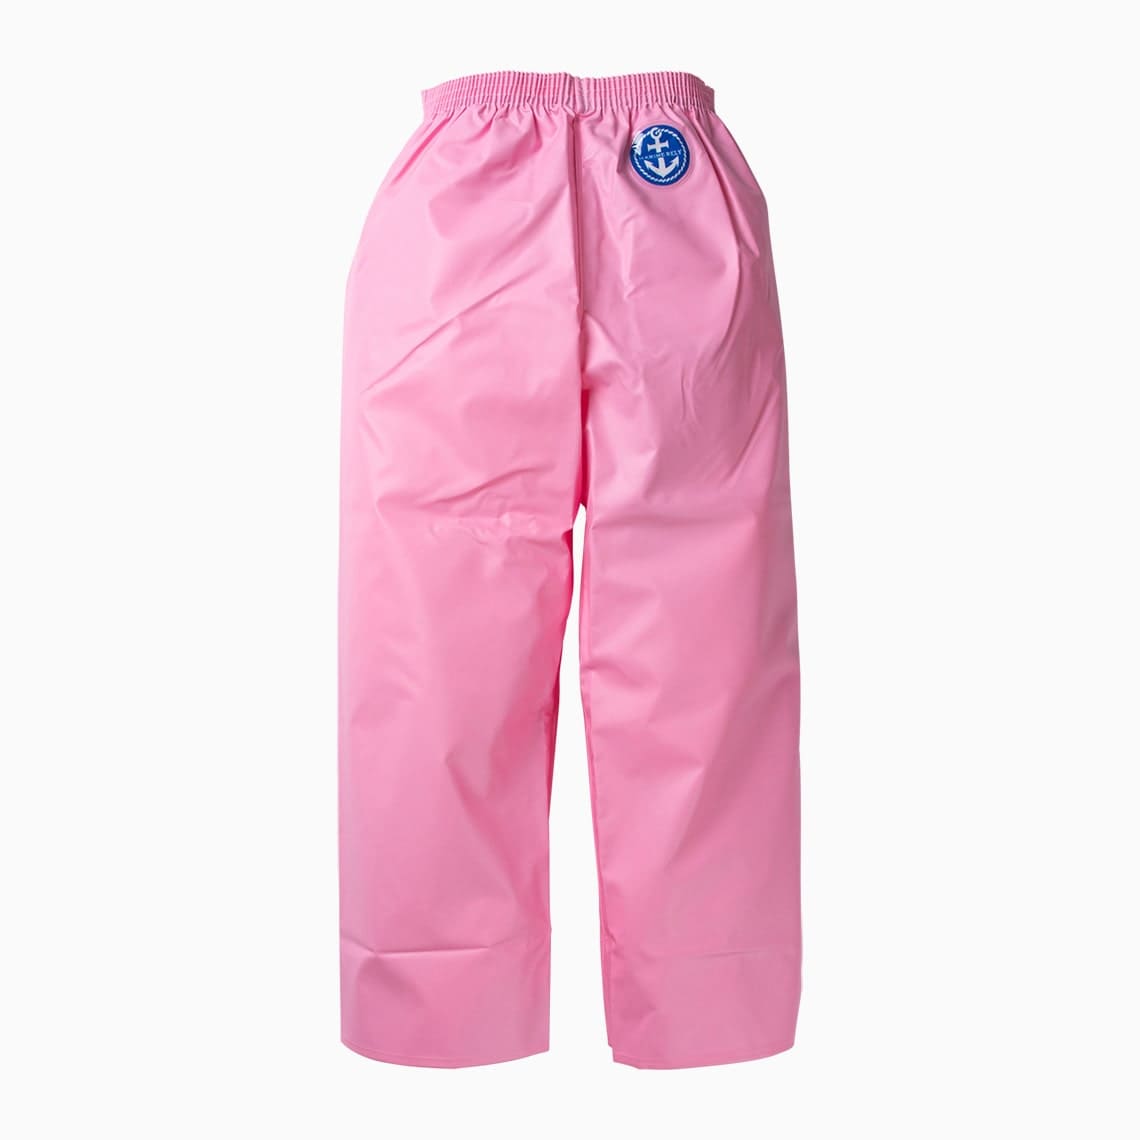 Marine rely pants Pink